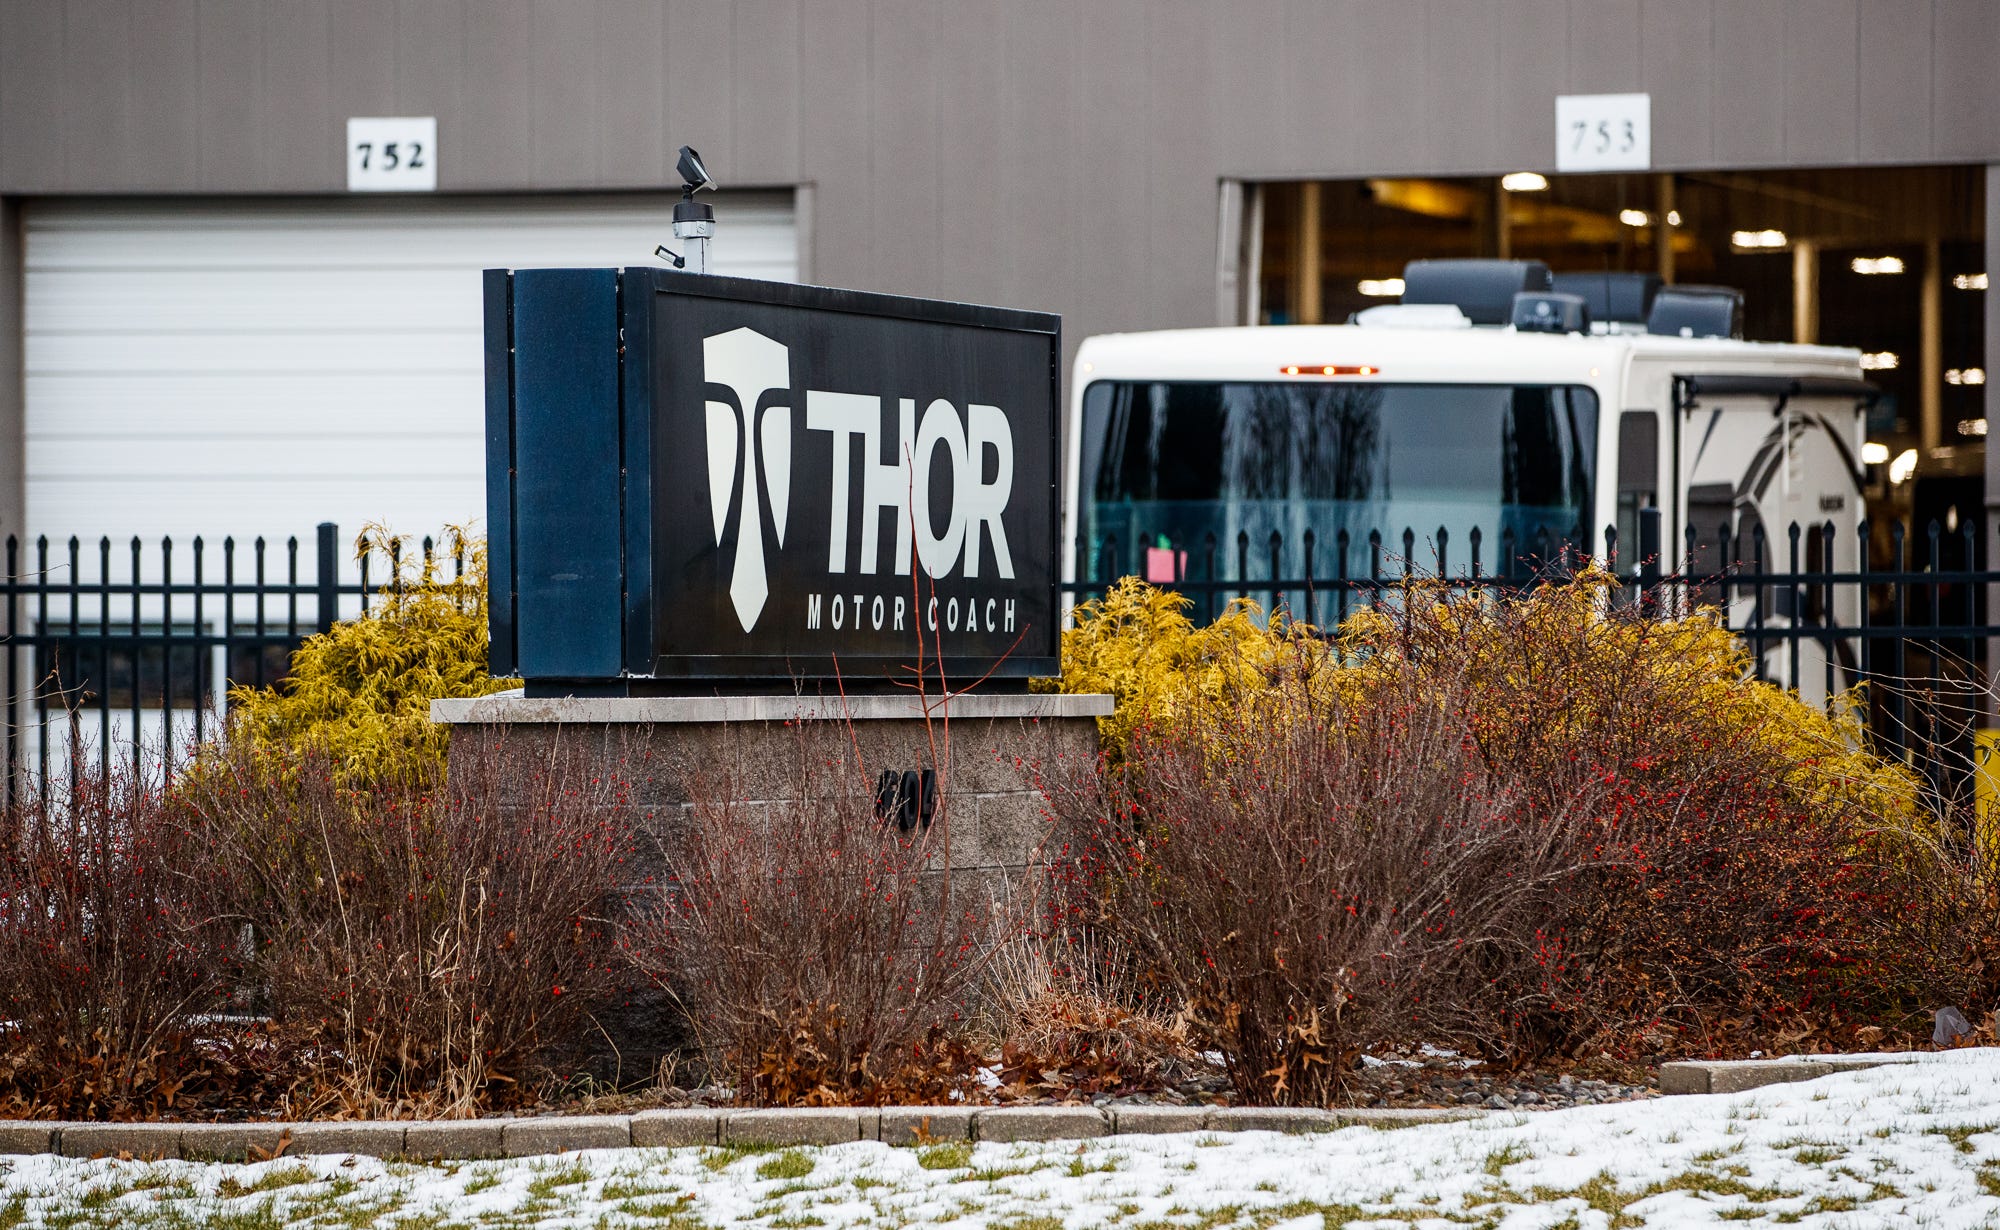 Thor Motor Coach plant 750, located at 604 Middleton Run Road in Elkhart, Indiana.